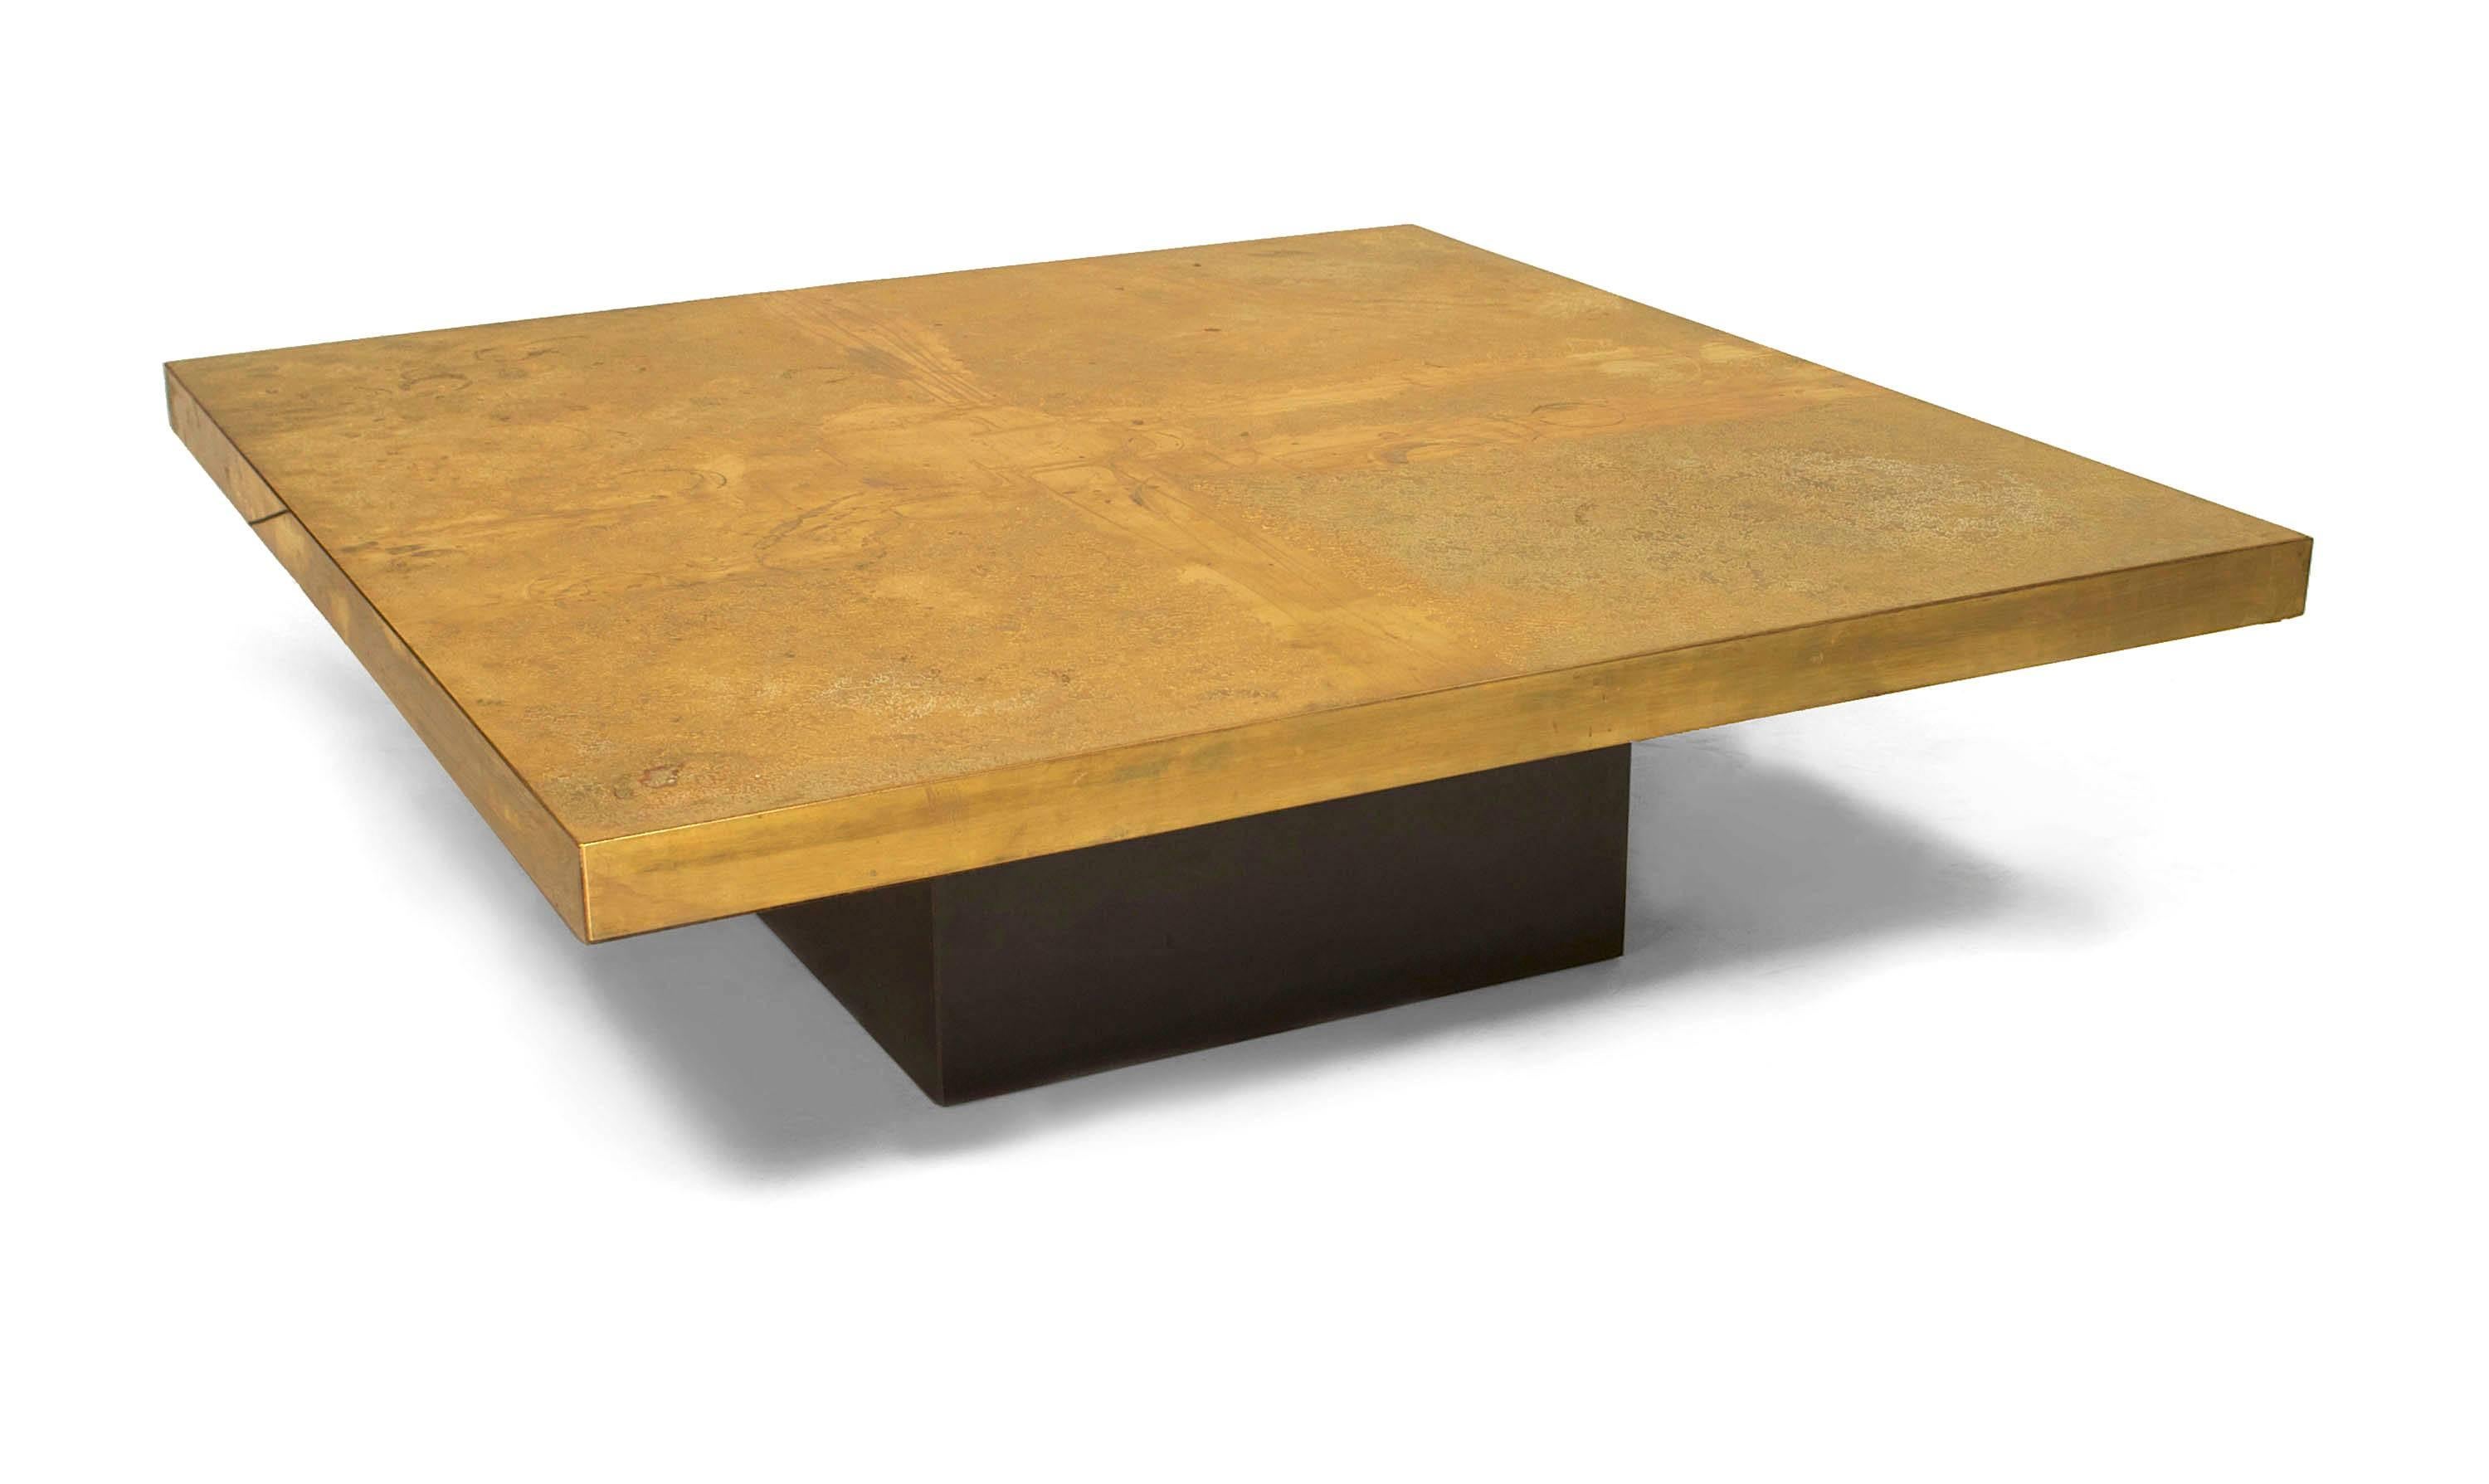 Belgian Modern design (1970s) square etched brass coffee table with a centered 